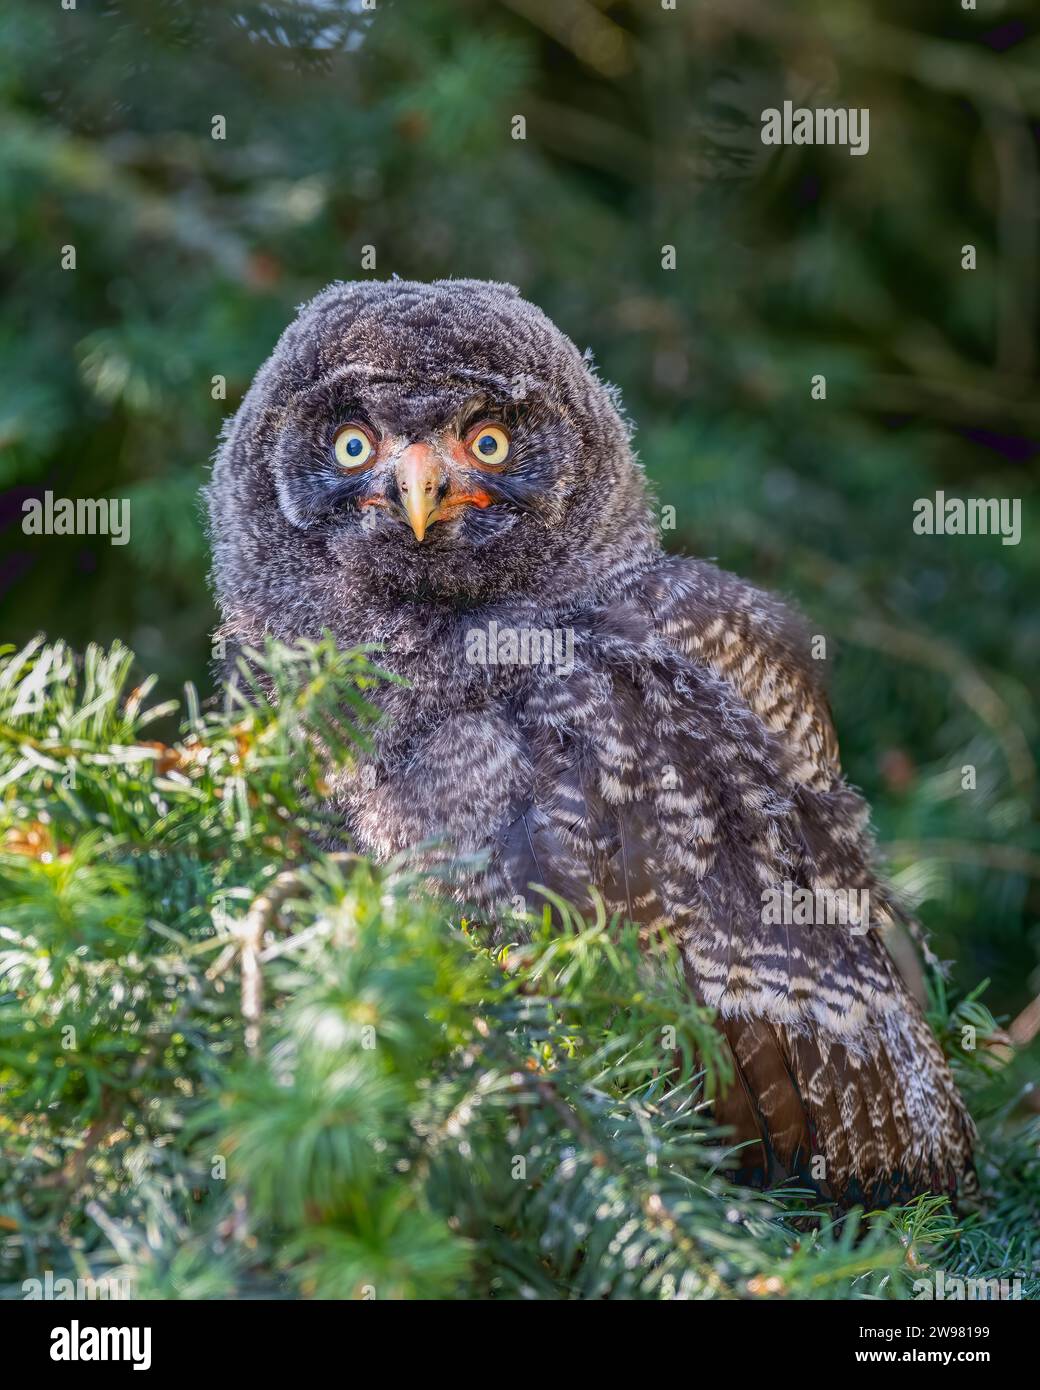 A majestic owl perched atop a tree branch surveys its surroundings with its intense gaze. Stock Photo